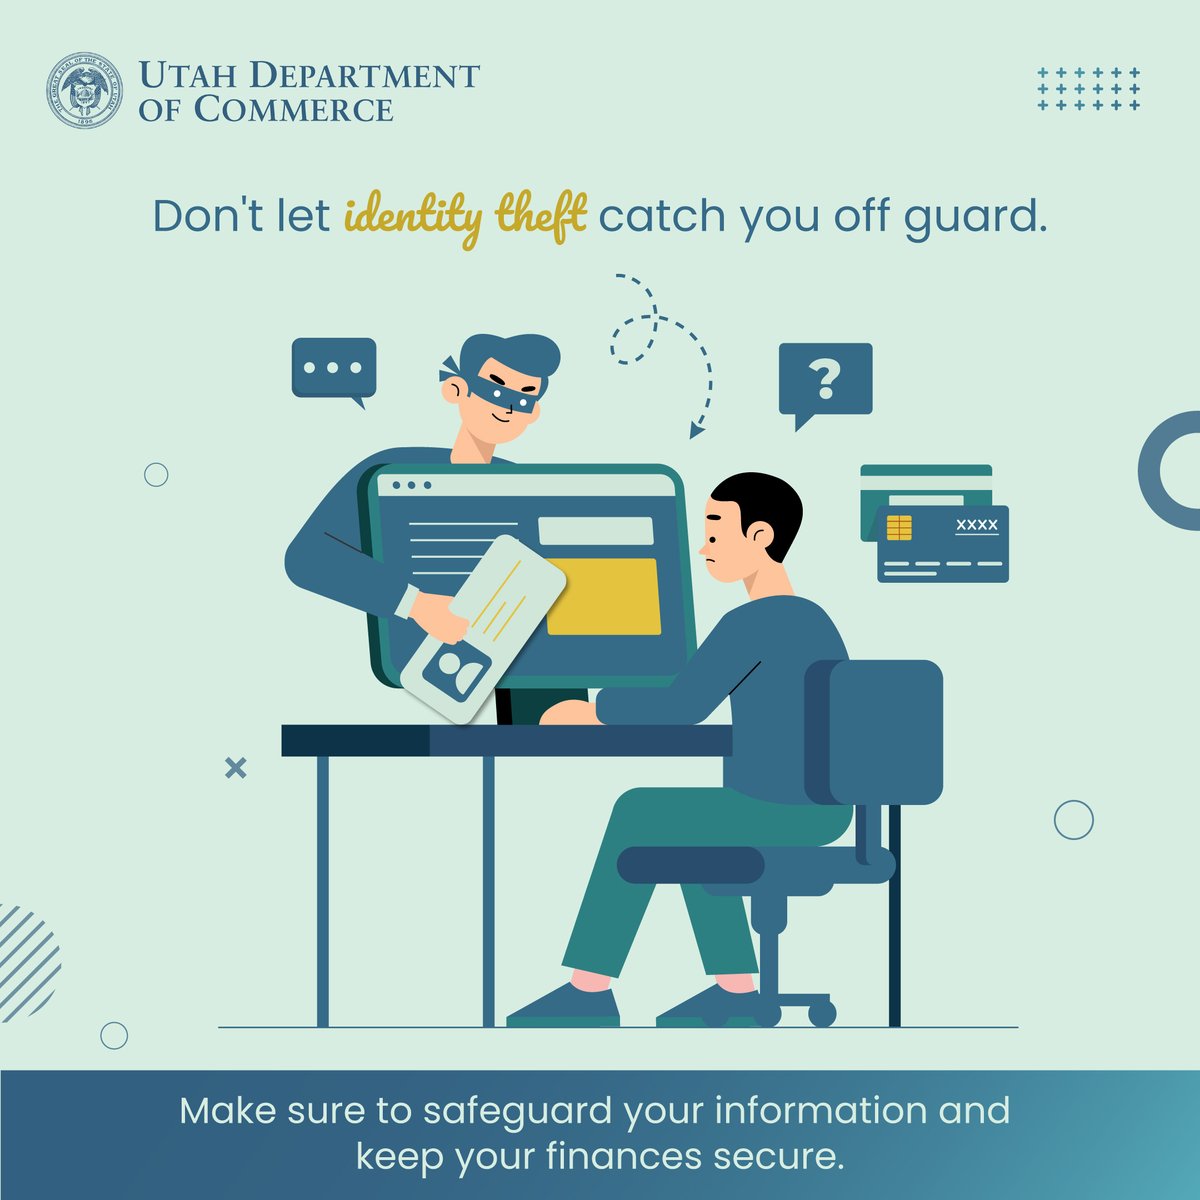 Your identity is your most valuable asset. Don't let identity theft catch you off guard. Make sure to safeguard your information and keep your finances secure with this checklist: finra.org/investors/prot…